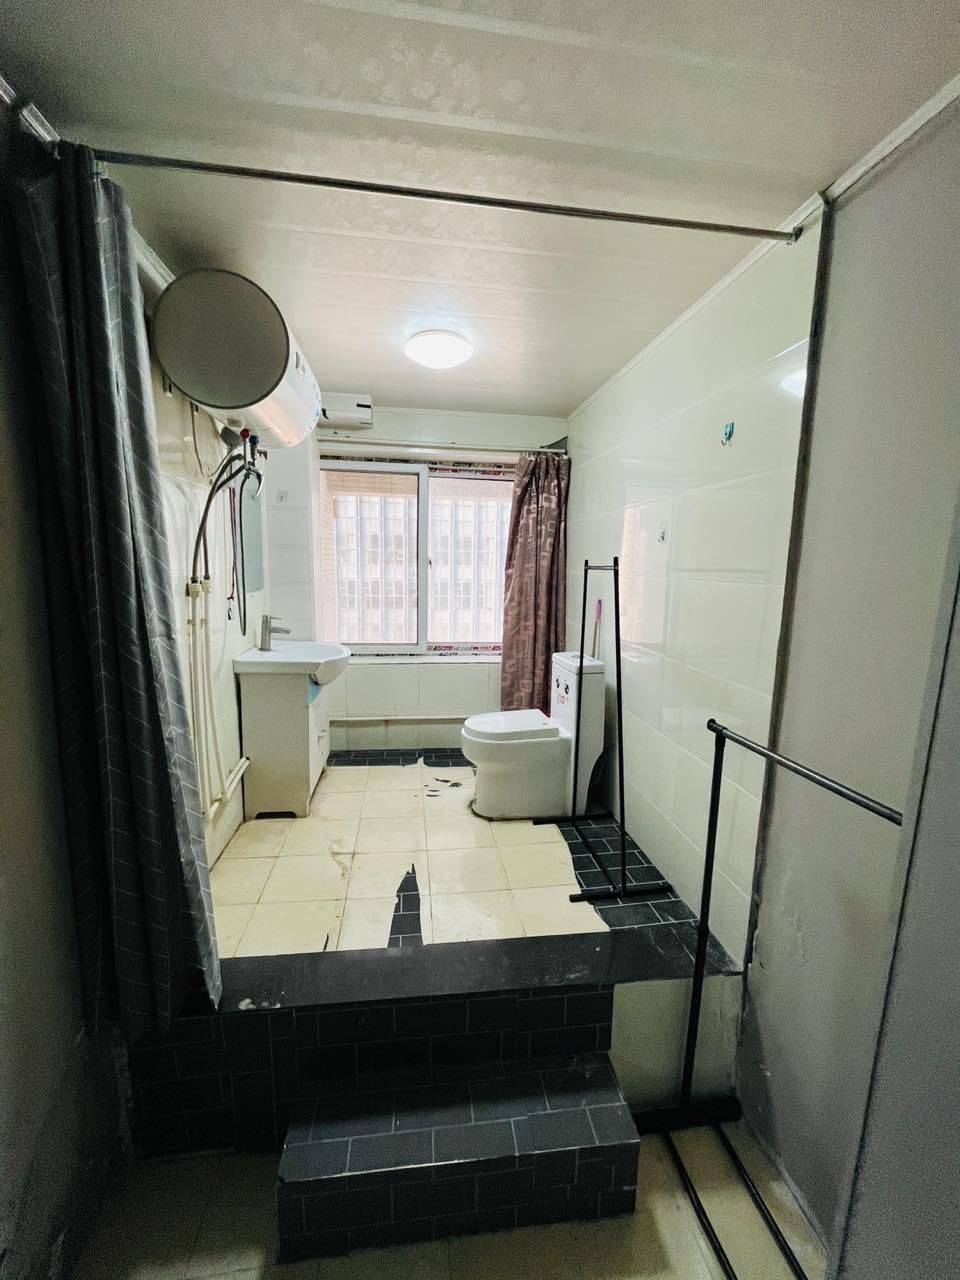 Xi'An-Weiyang-Cozy Home,Clean&Comfy,No Gender Limit,Hustle & Bustle